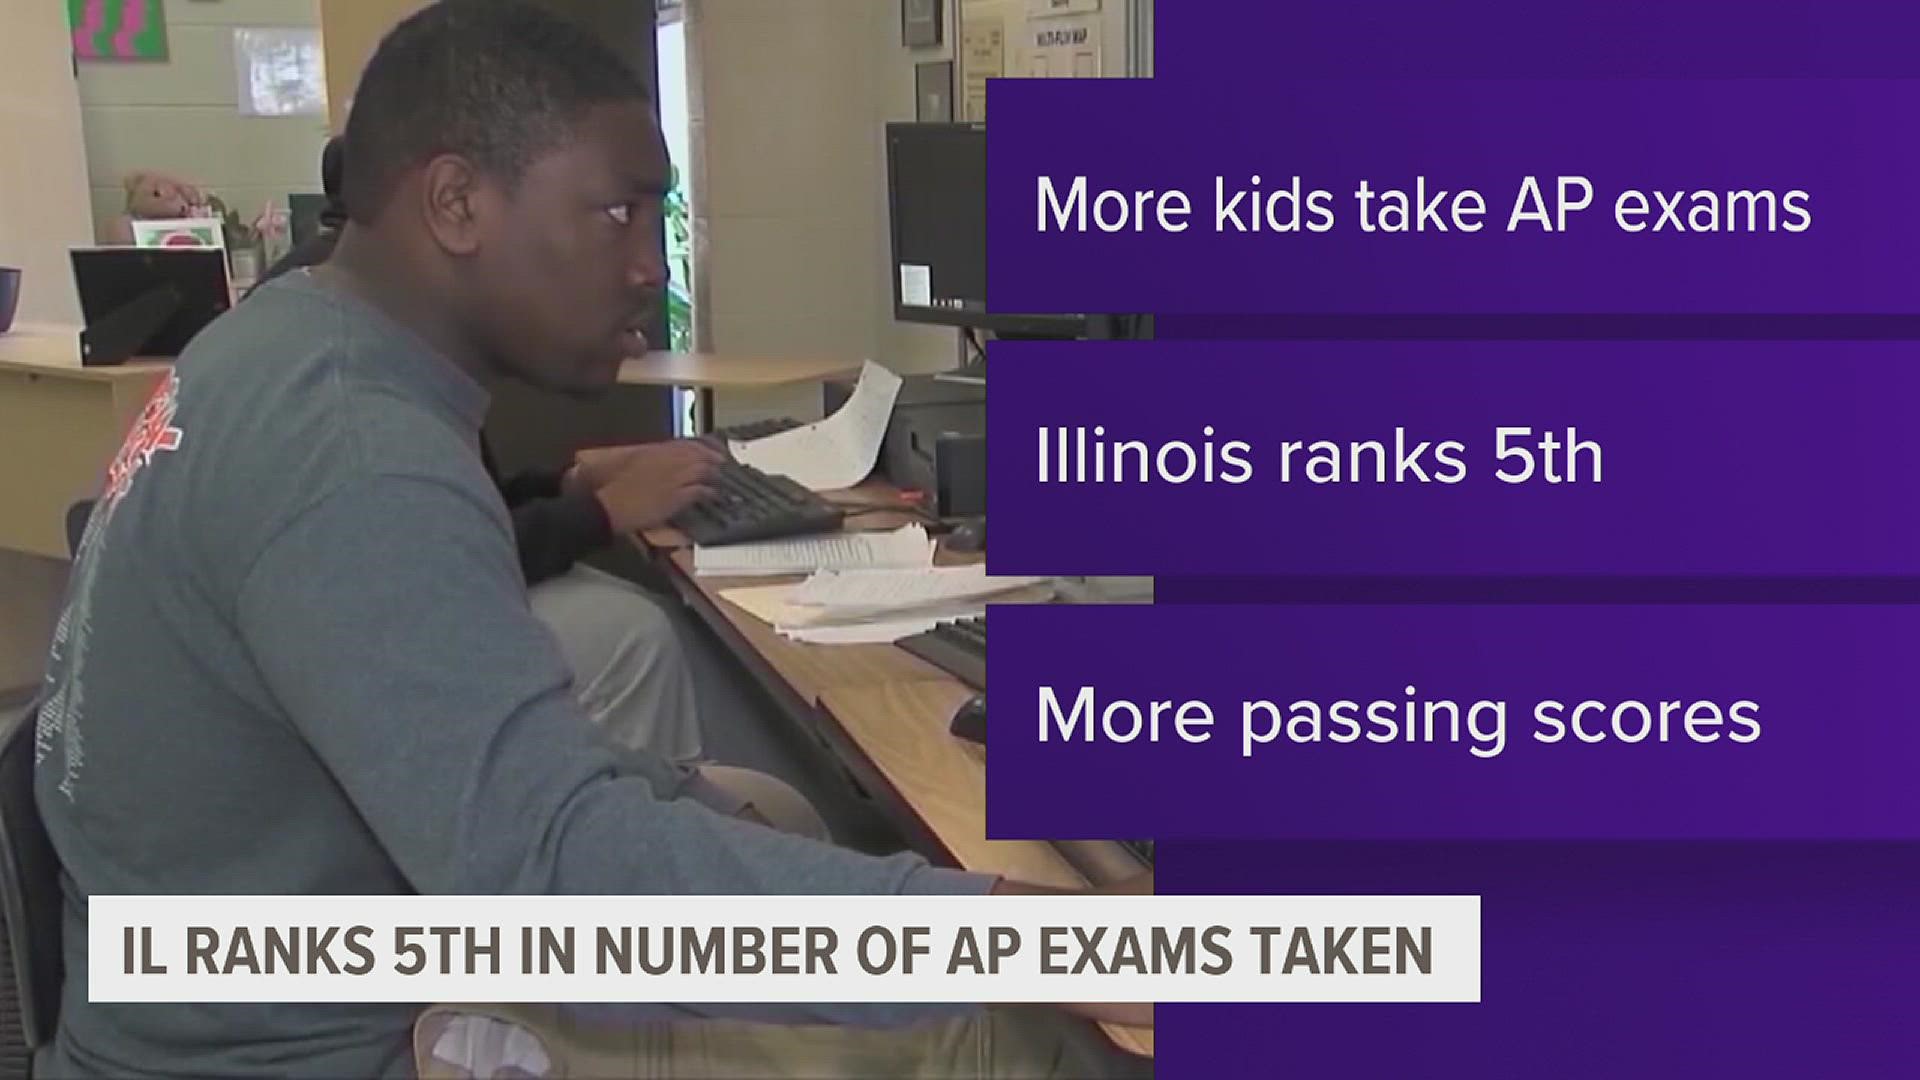 The number of advanced placement tests with passing scores also increased from last year by 20%.